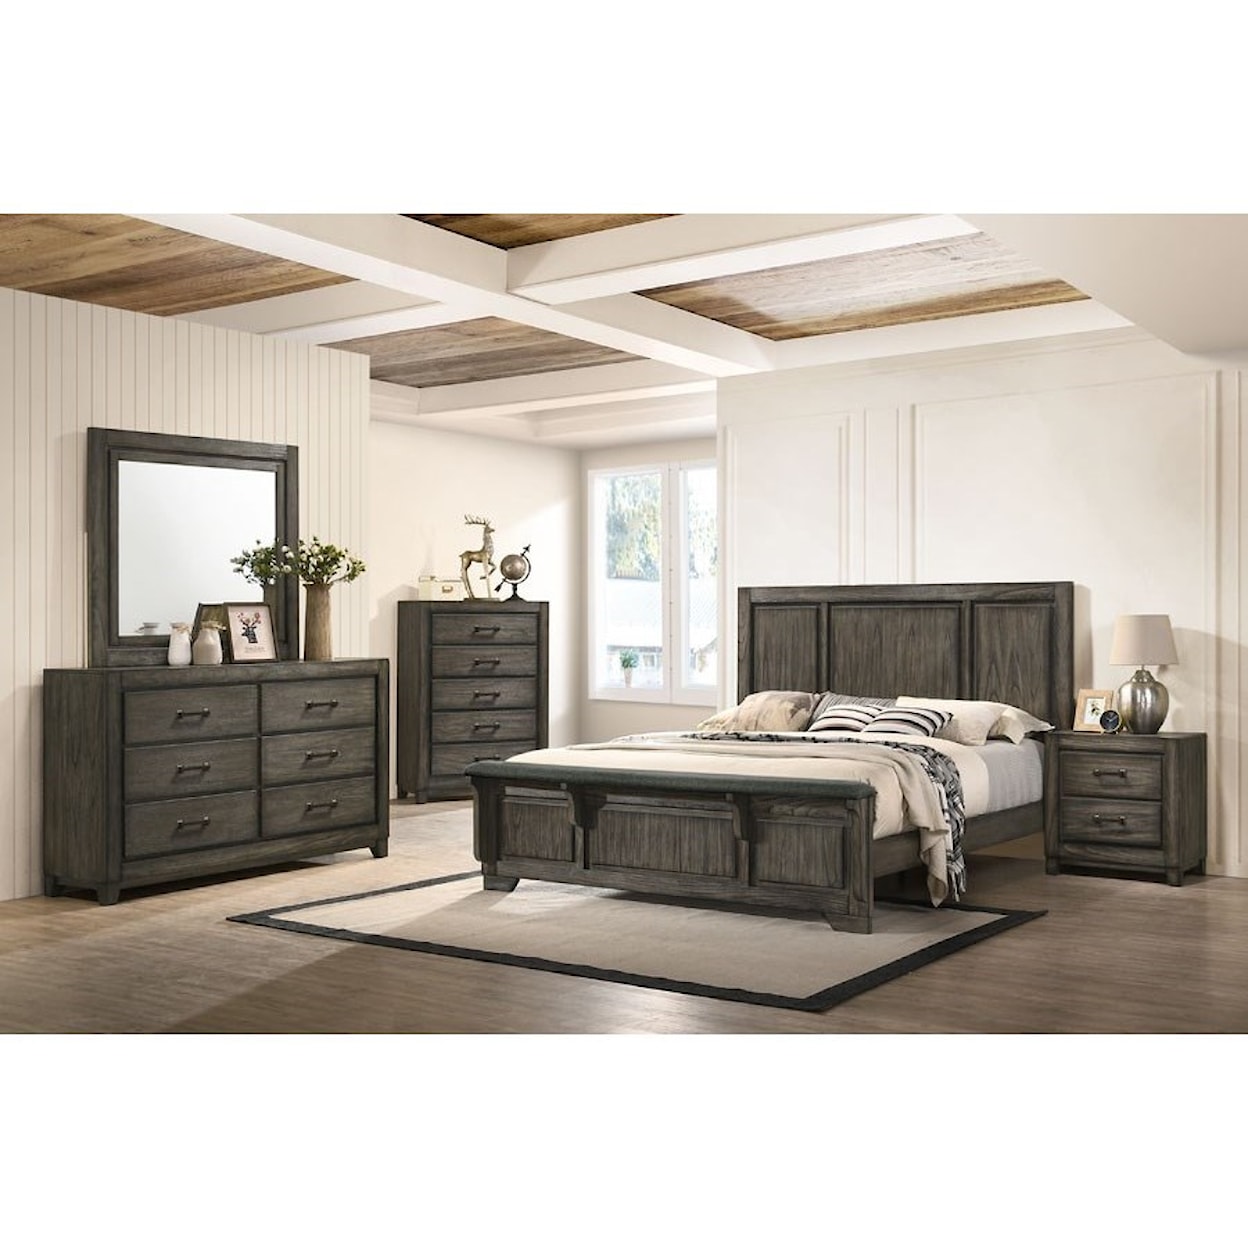 New Classic Furniture Ashland King Bedroom Group